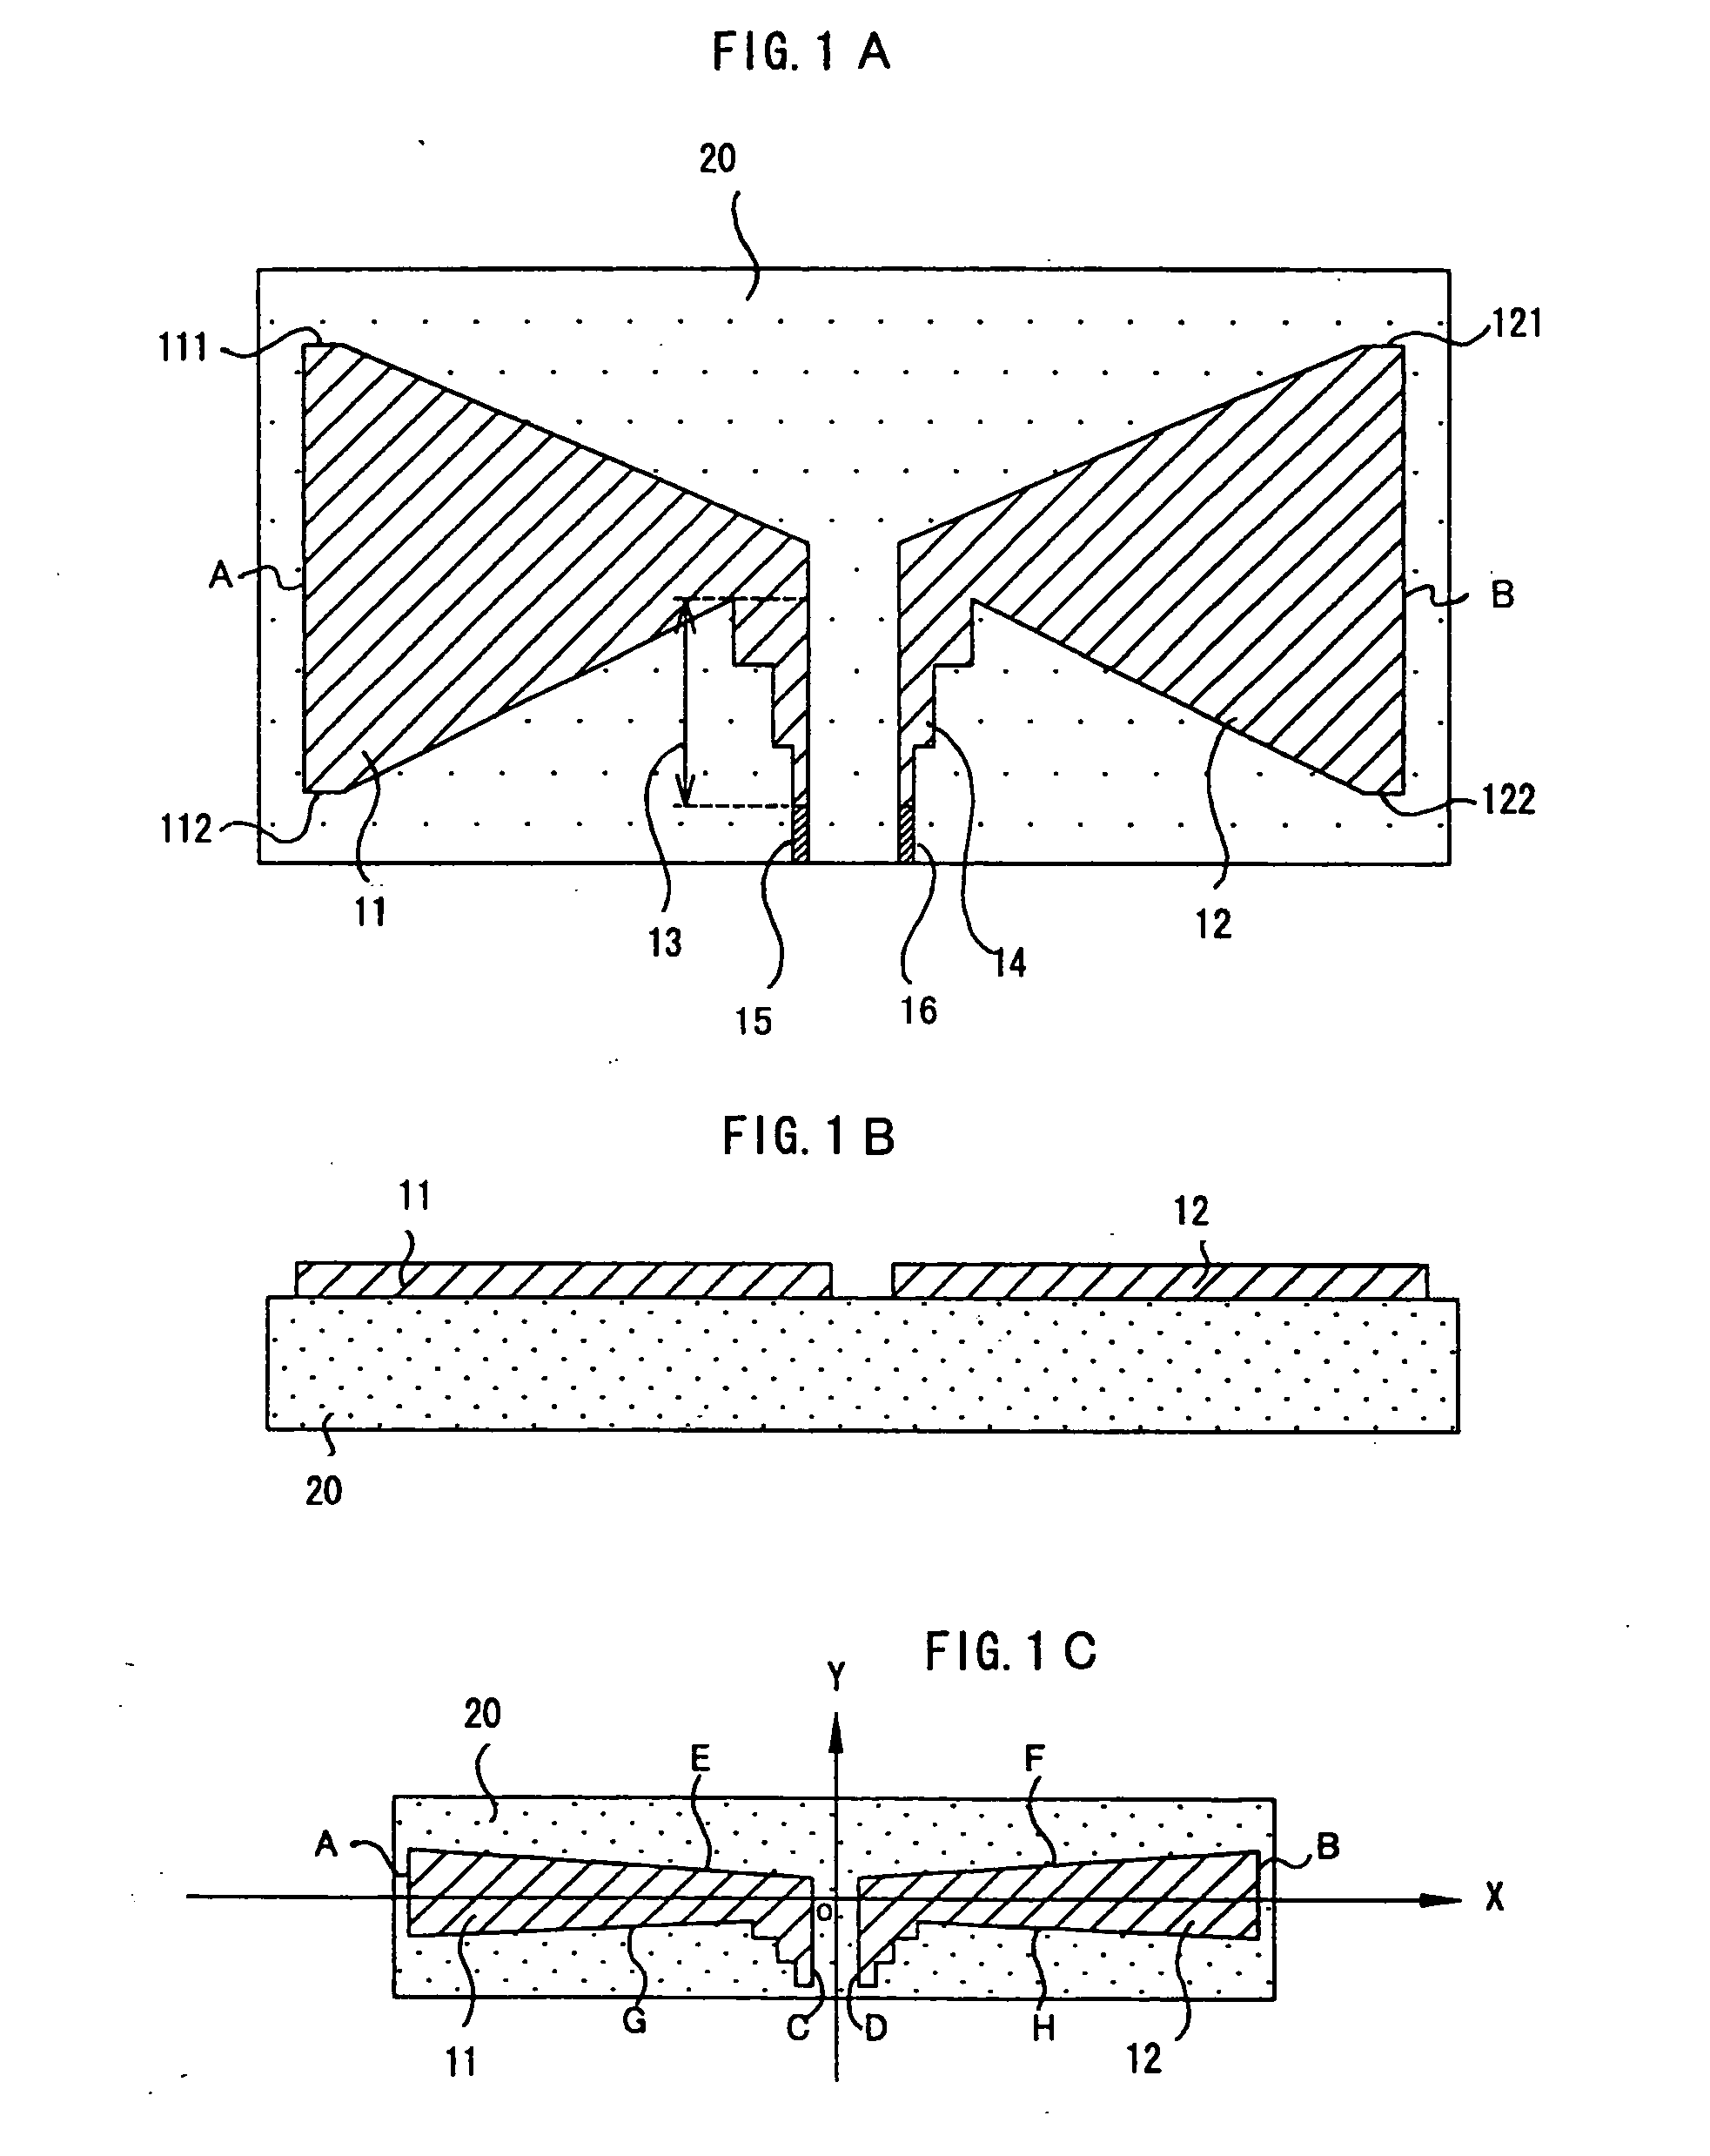 Ultra wideband bow-tie printed antenna